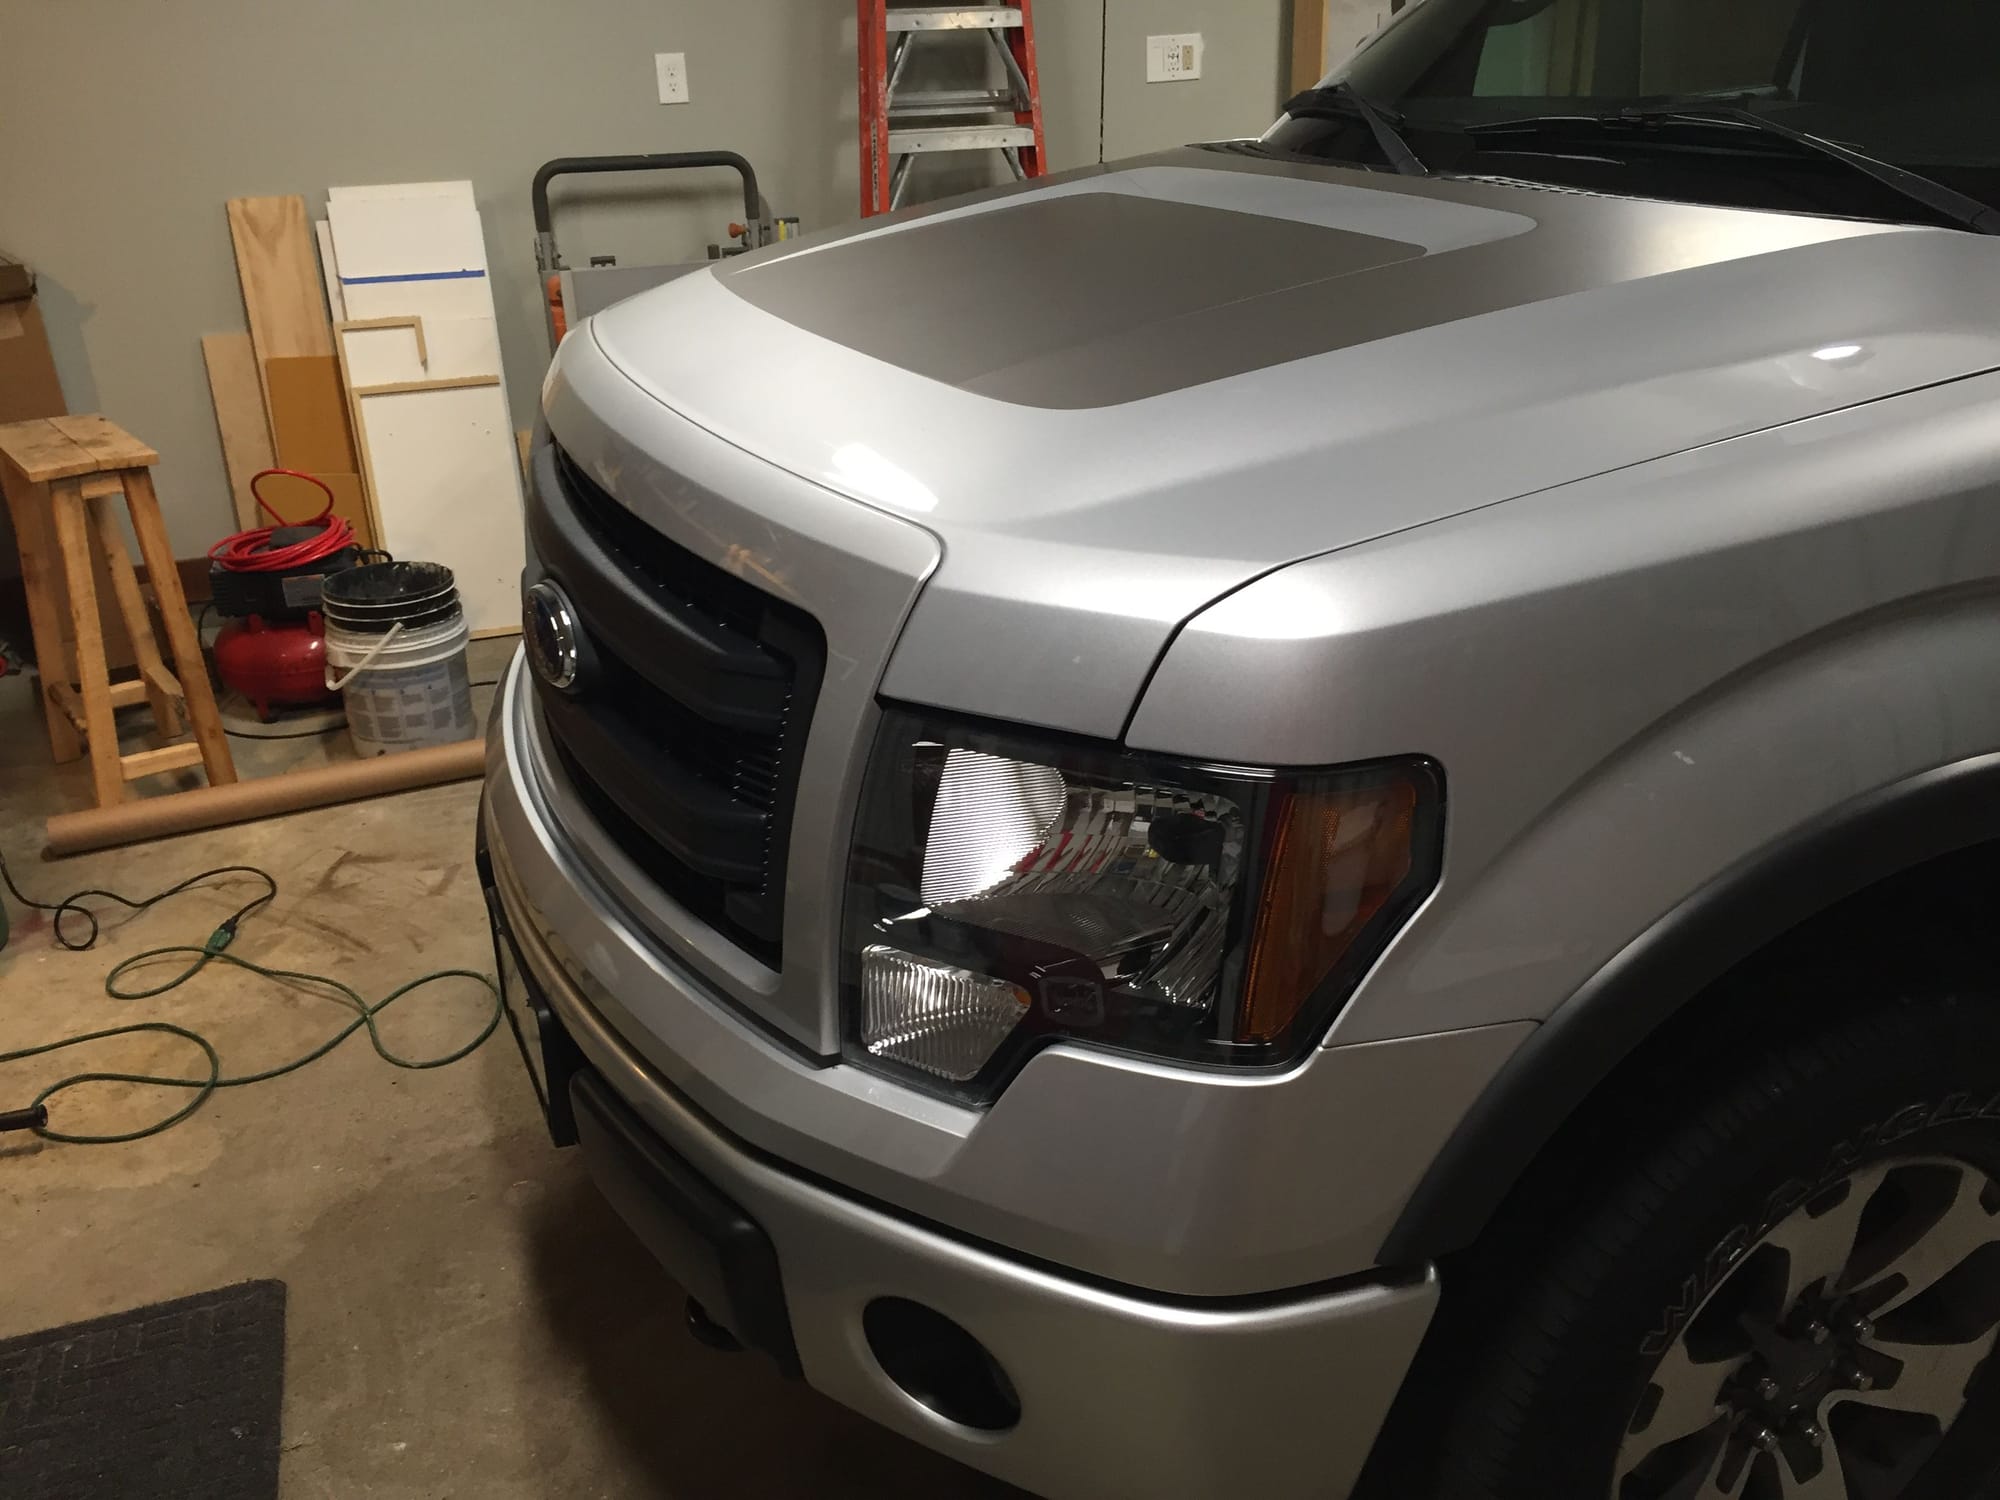 Ingot Silver Metallic Vinyl Wrap?? Page 2 Ford F150 Forum Community of Ford Truck Fans